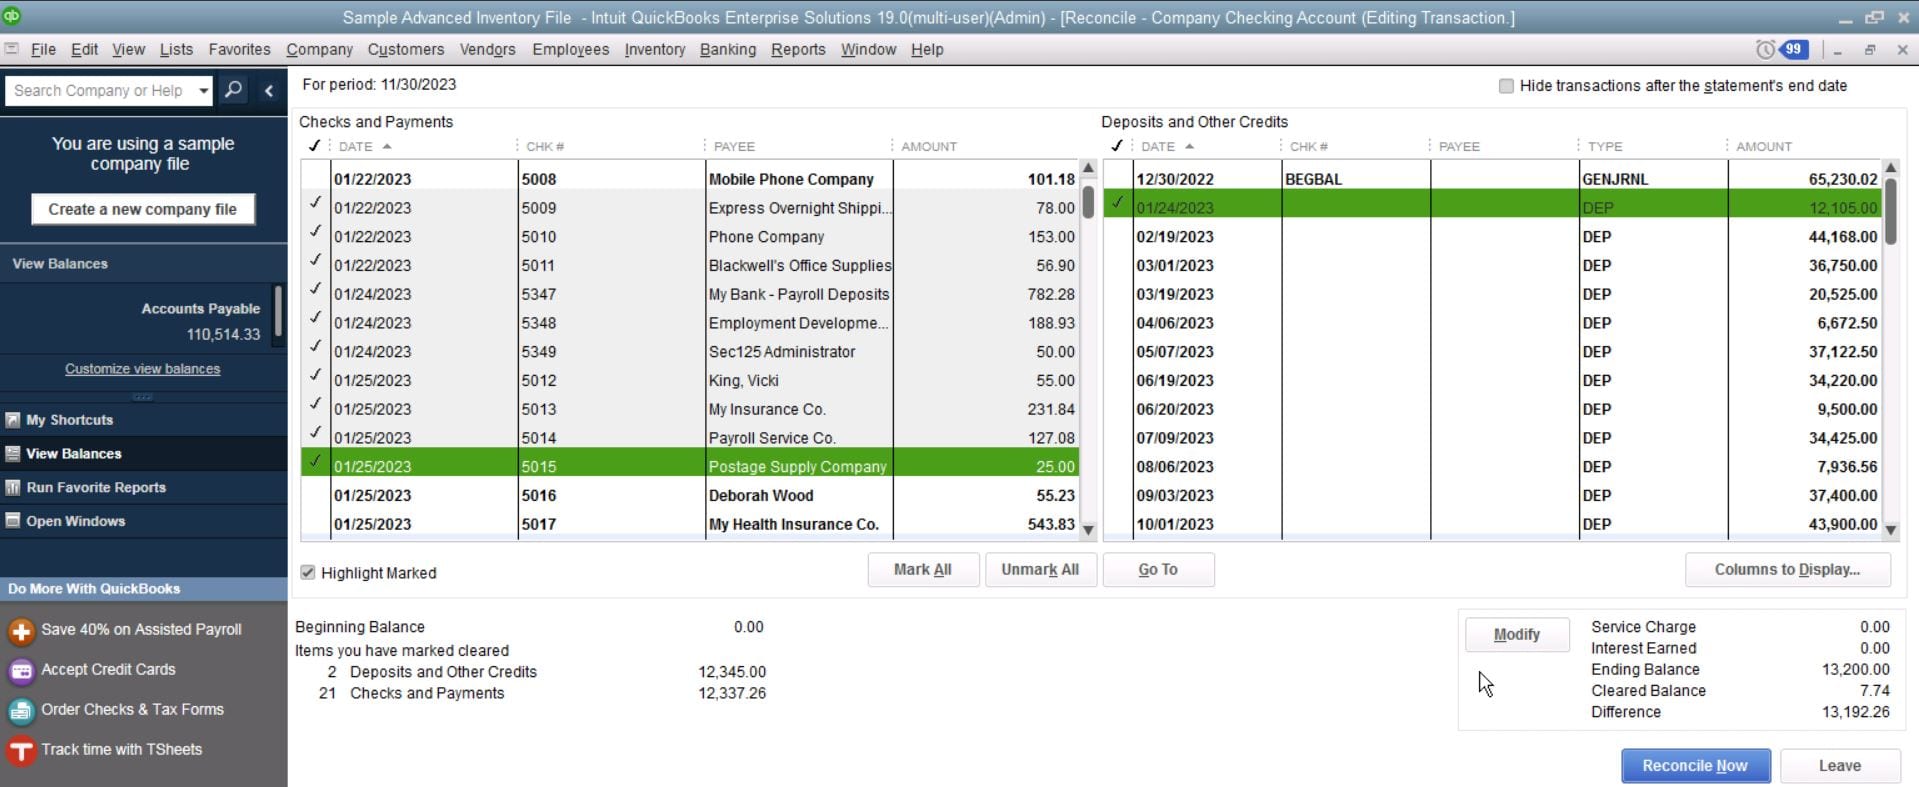 QuickBooks Enterprise Check and Payments